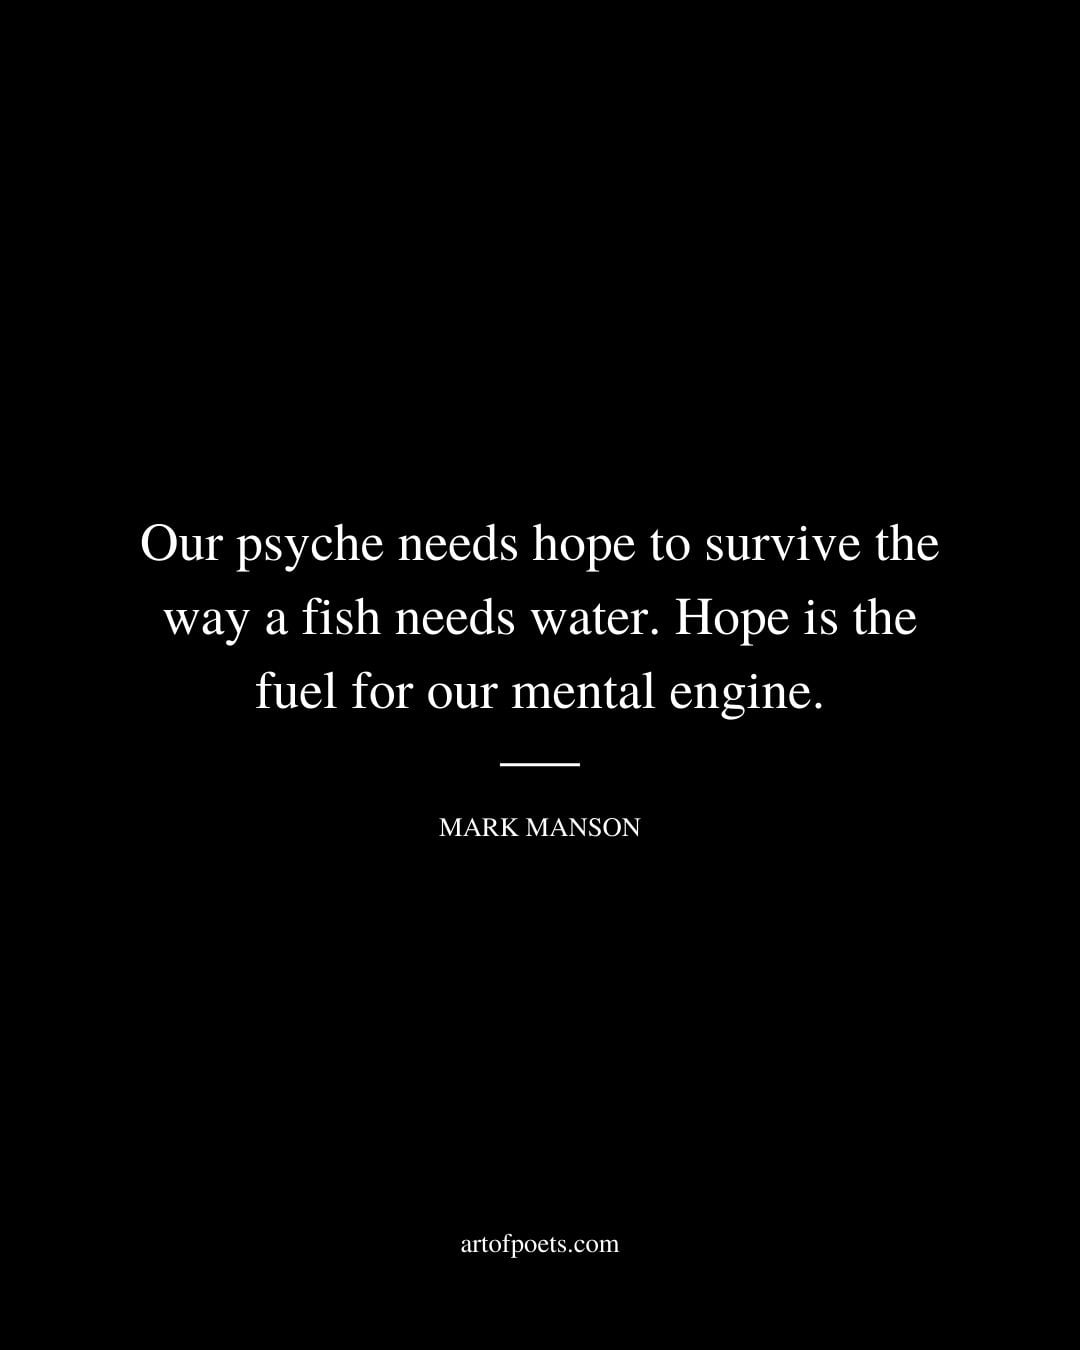 Our psyche needs hope to survive the way a fish needs water. Hope is the fuel for our mental engine. Mark manson